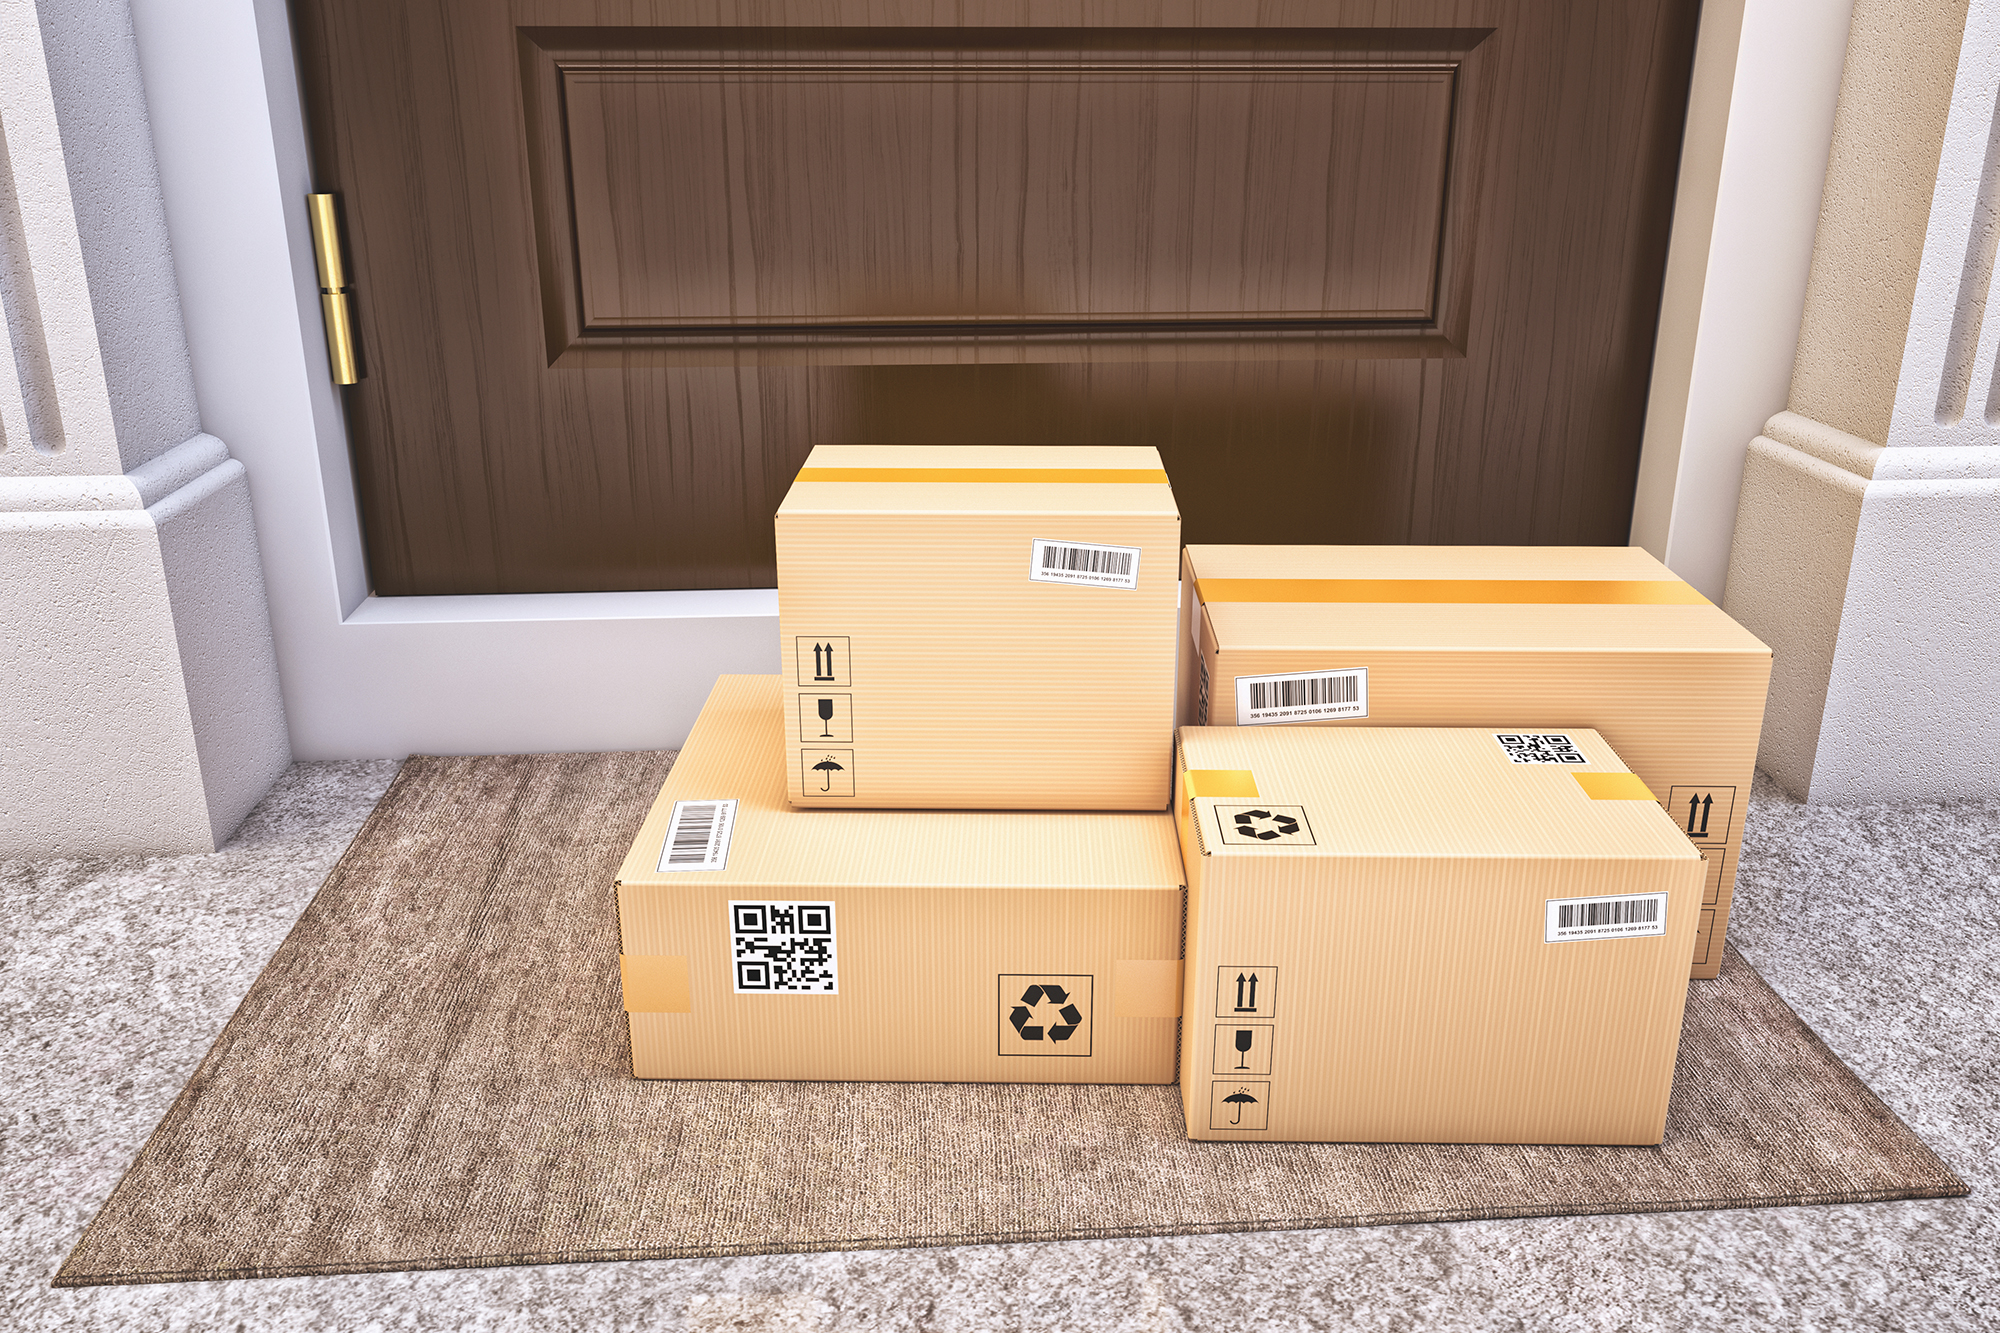 Packages waiting on a doorstep